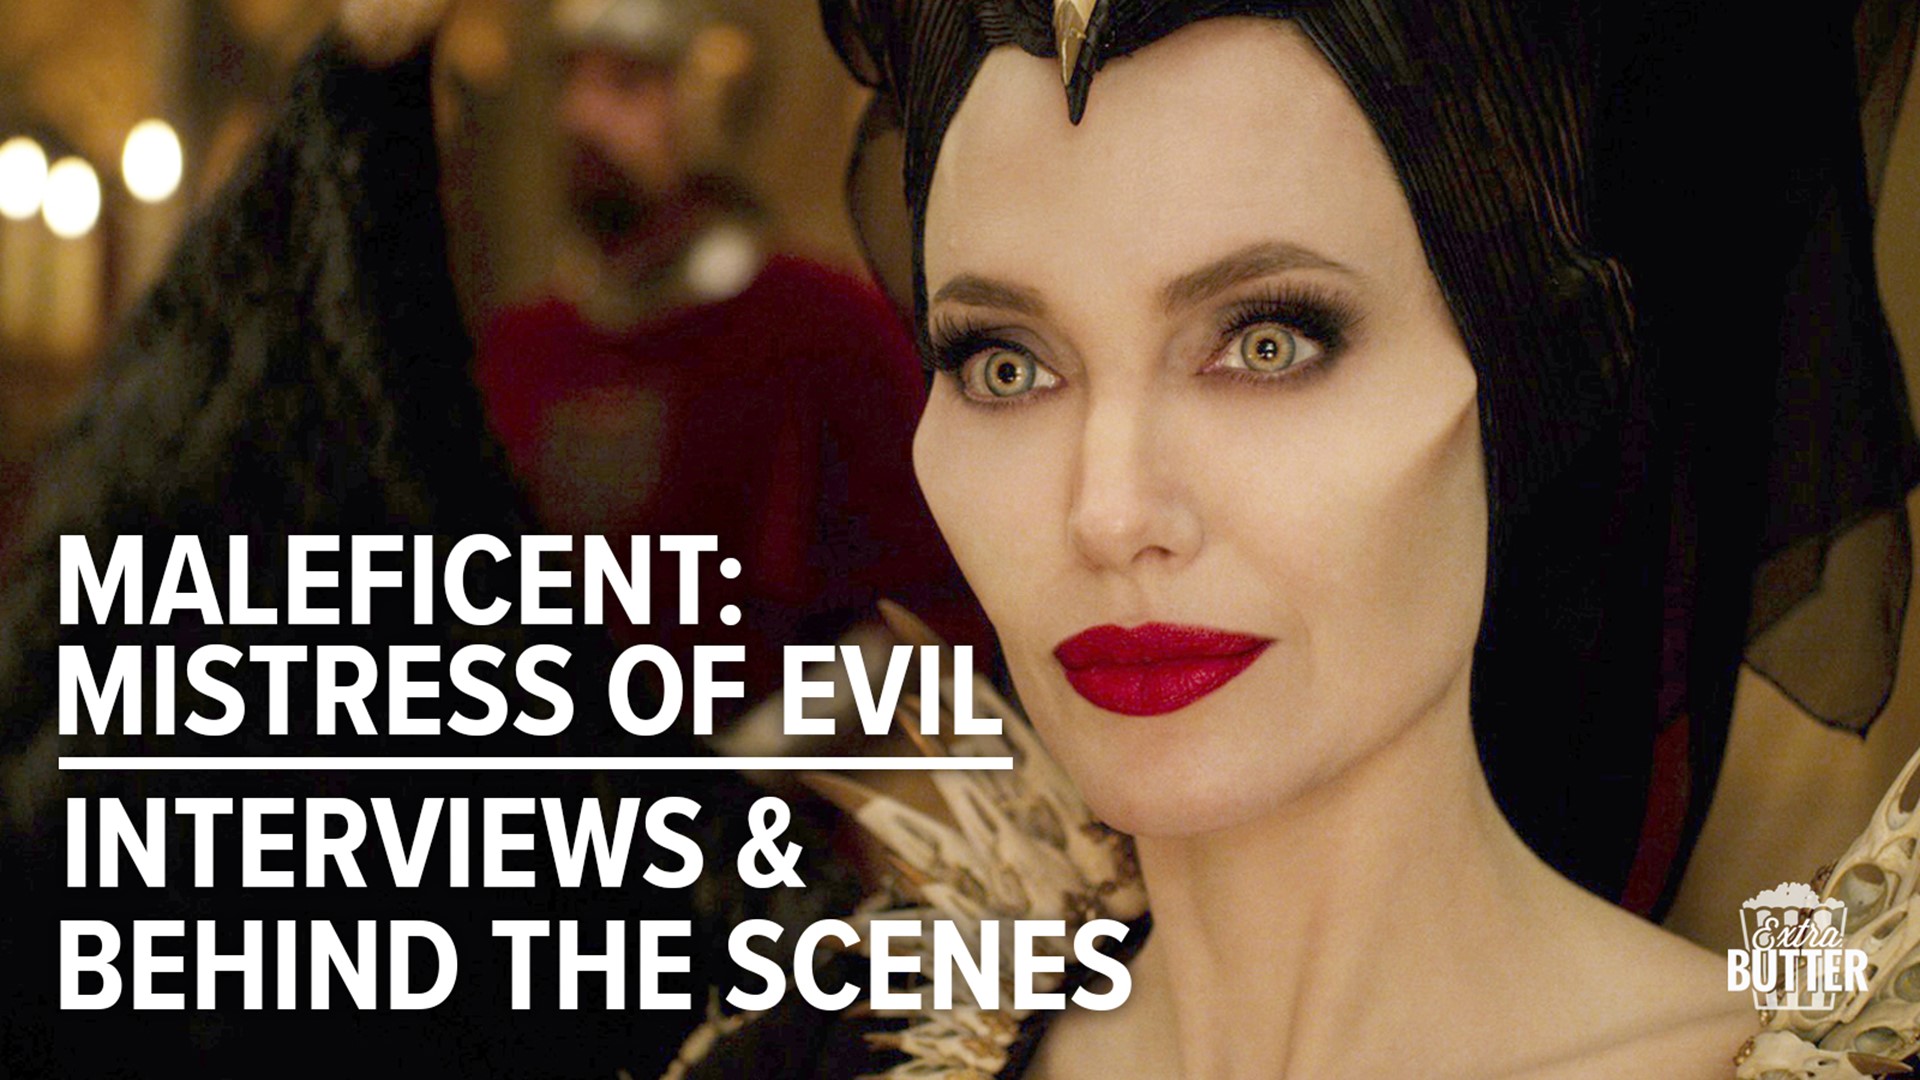 Mark S. Allen interviews the stars of 'Maleficent: Mistress of Evil' including Angelina Jolie, Michelle Pfeiffer, and Elle Fanning.